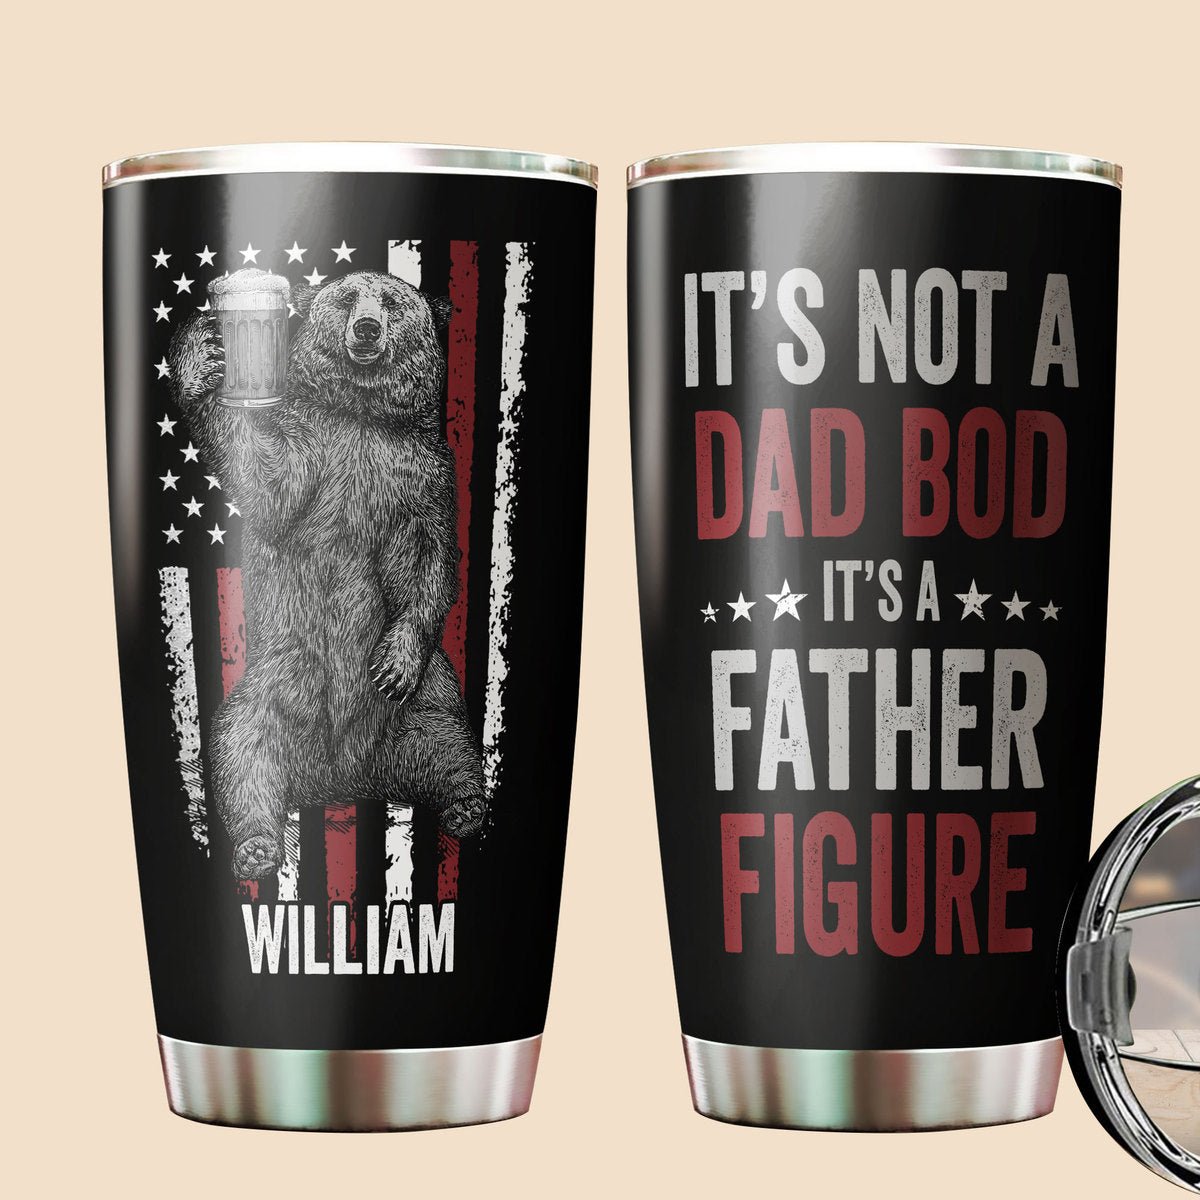 https://cdn.shopify.com/s/files/1/0640/1861/2460/products/its-not-a-dad-bod-bear-personalized-tumbler-best-gift-for-dad-701270_1600x.jpg?v=1681487169